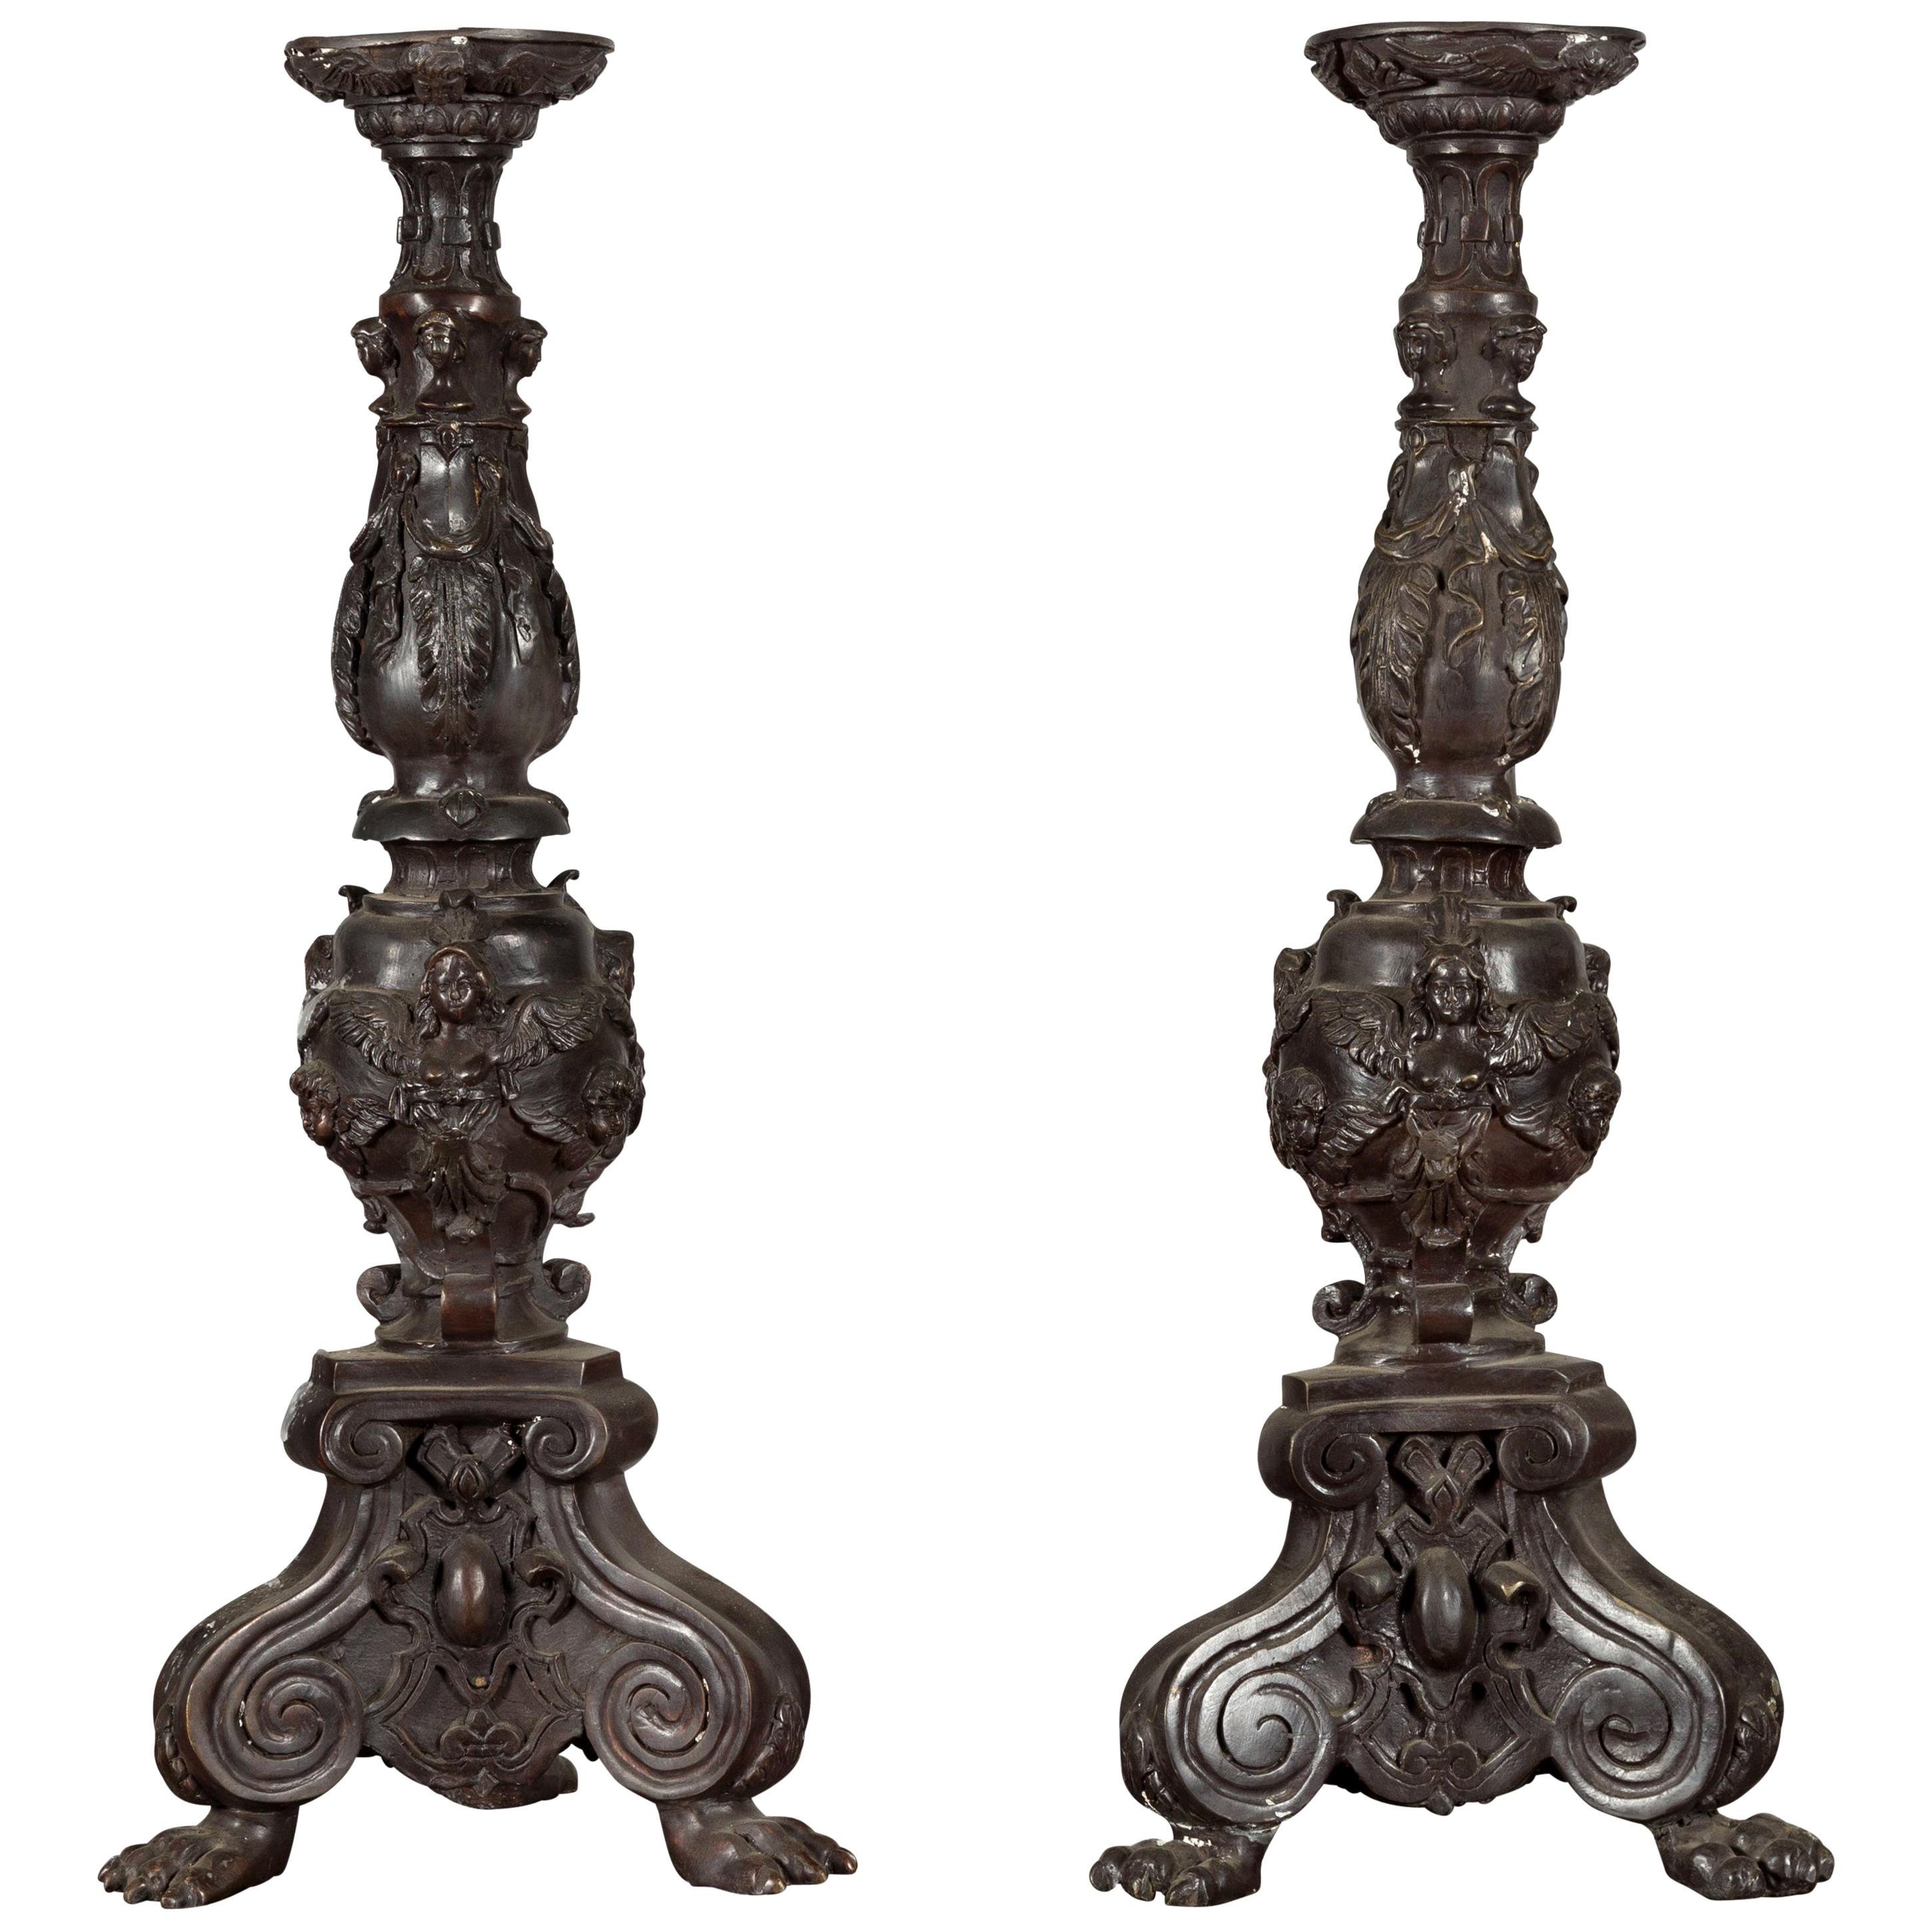 Pair of Vintage Baroque Style Cast Bronze Candlesticks with Cherub Figures For Sale